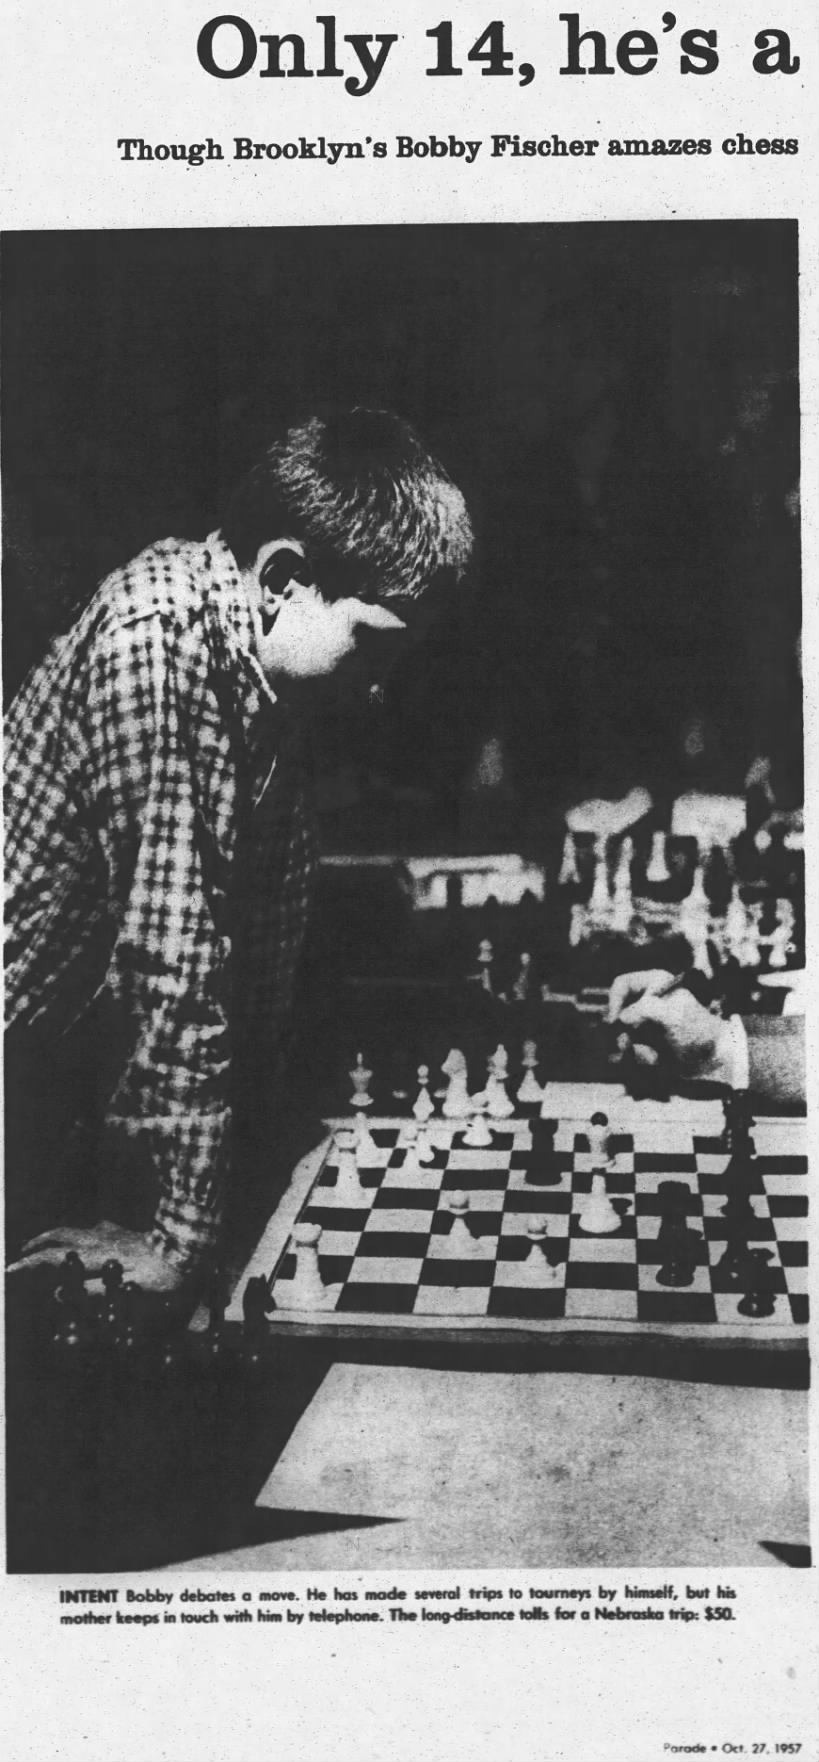 Only 14, he's a chess whiz (Column 1)